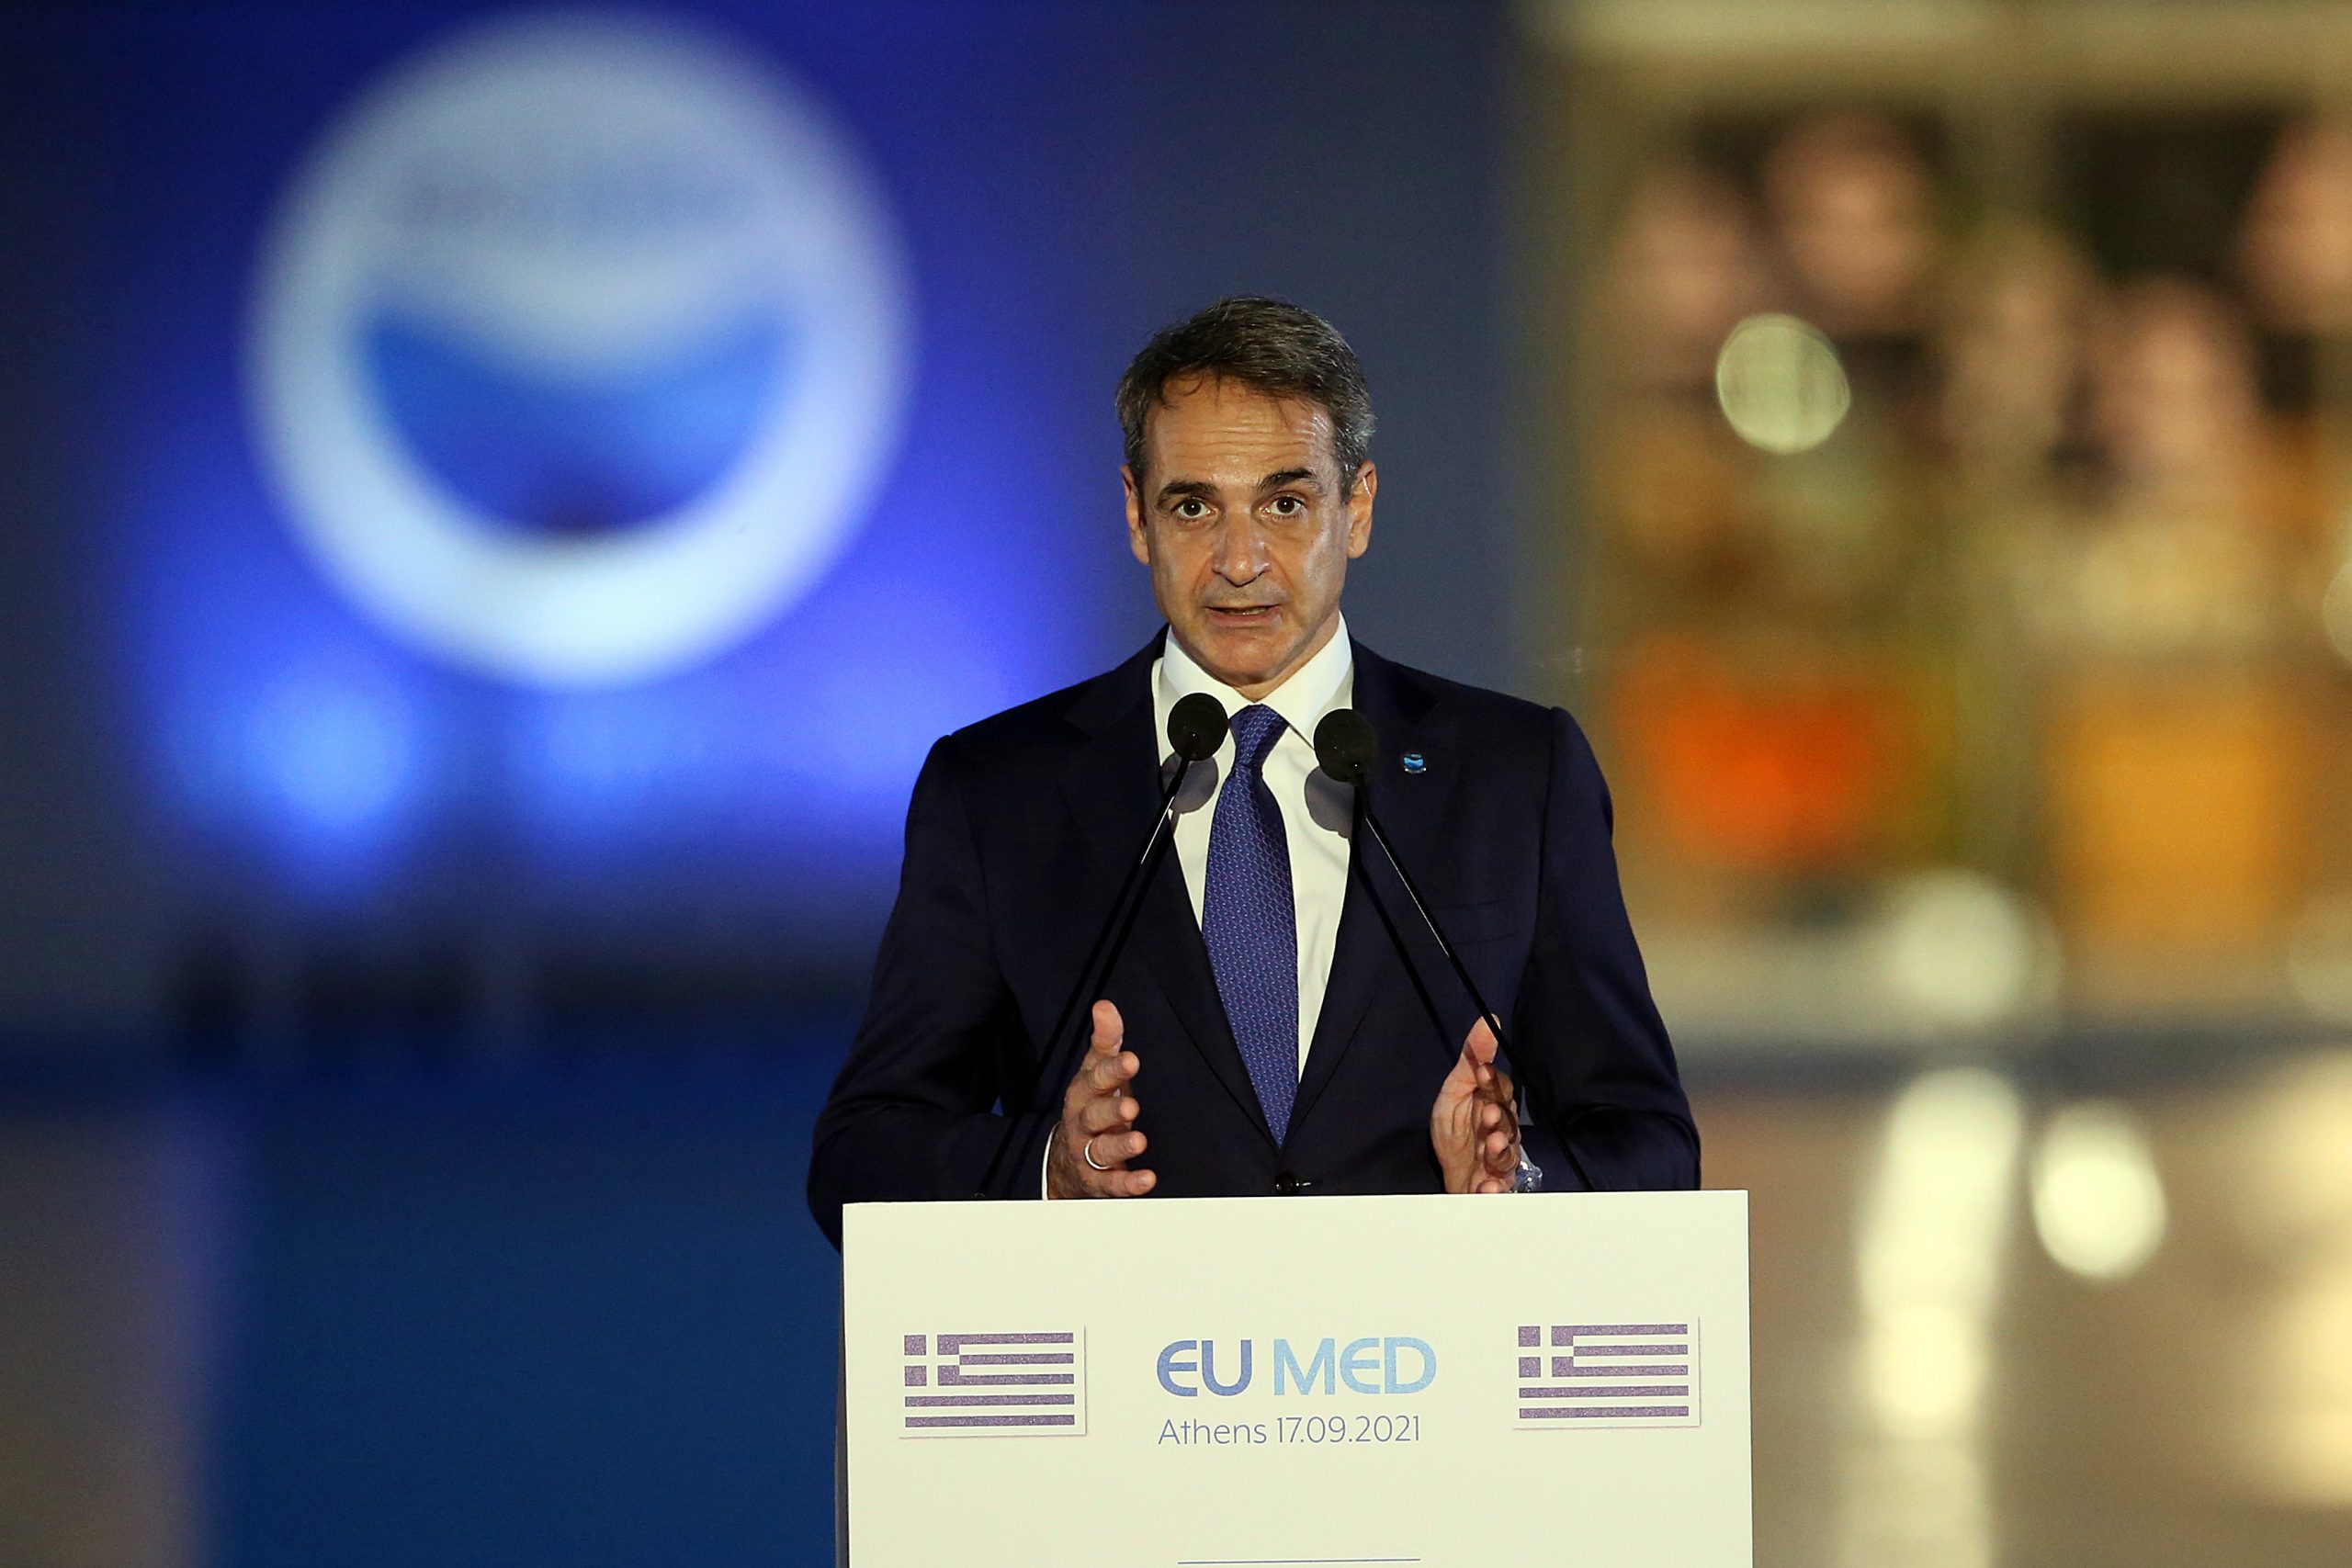 epa09473985 Prime Minister of Greece Kyriakos Mitsotakis makes statements during the EUMed9 Summit, in Athens, Greece, 17 September 2021.The agenda of the Summit, which acquires special geopolitical weight, includes security challenges in the Mediterranean that endanger stability in the region, potential new crises, such as the threat of migration flows after the latest developments in Afghanistan, and other crises, the consequences of which Mediterranean countries are already experiencing.  EPA/ORESTIS PANAGIOTOU